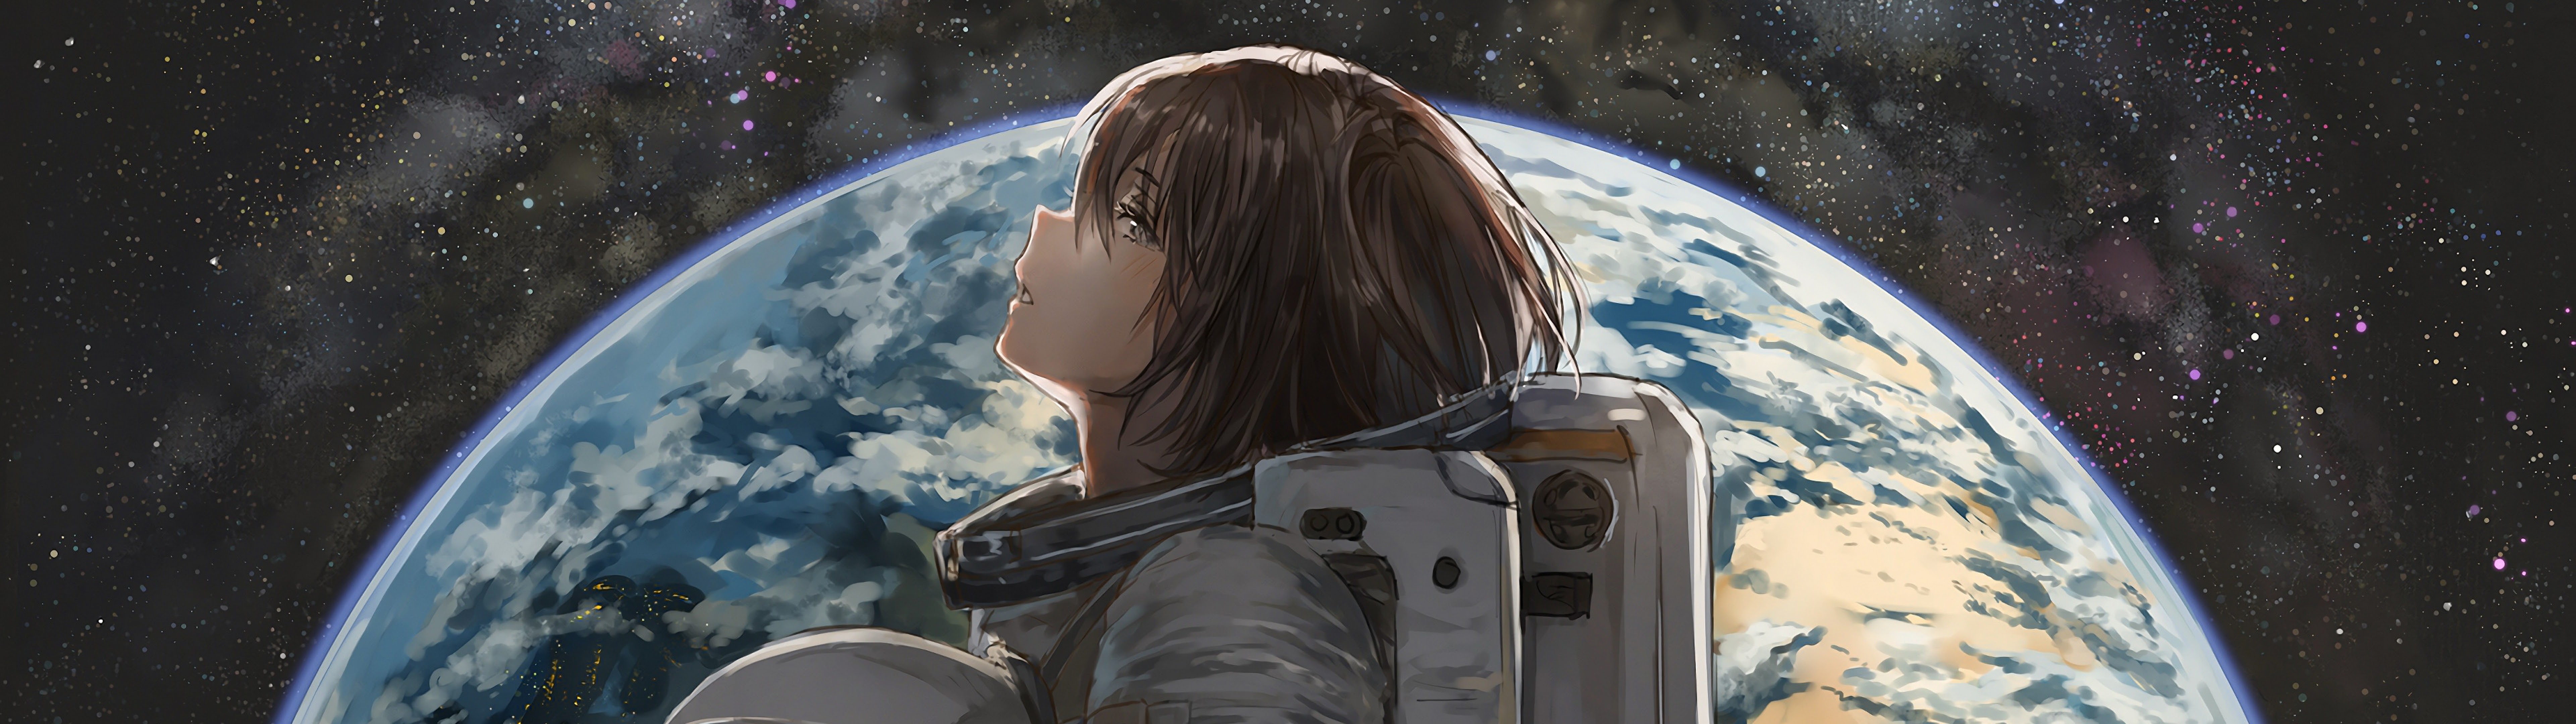 Space Astronaut Anime Girl Earth Phone iPhone 4K Wallpaper free Download